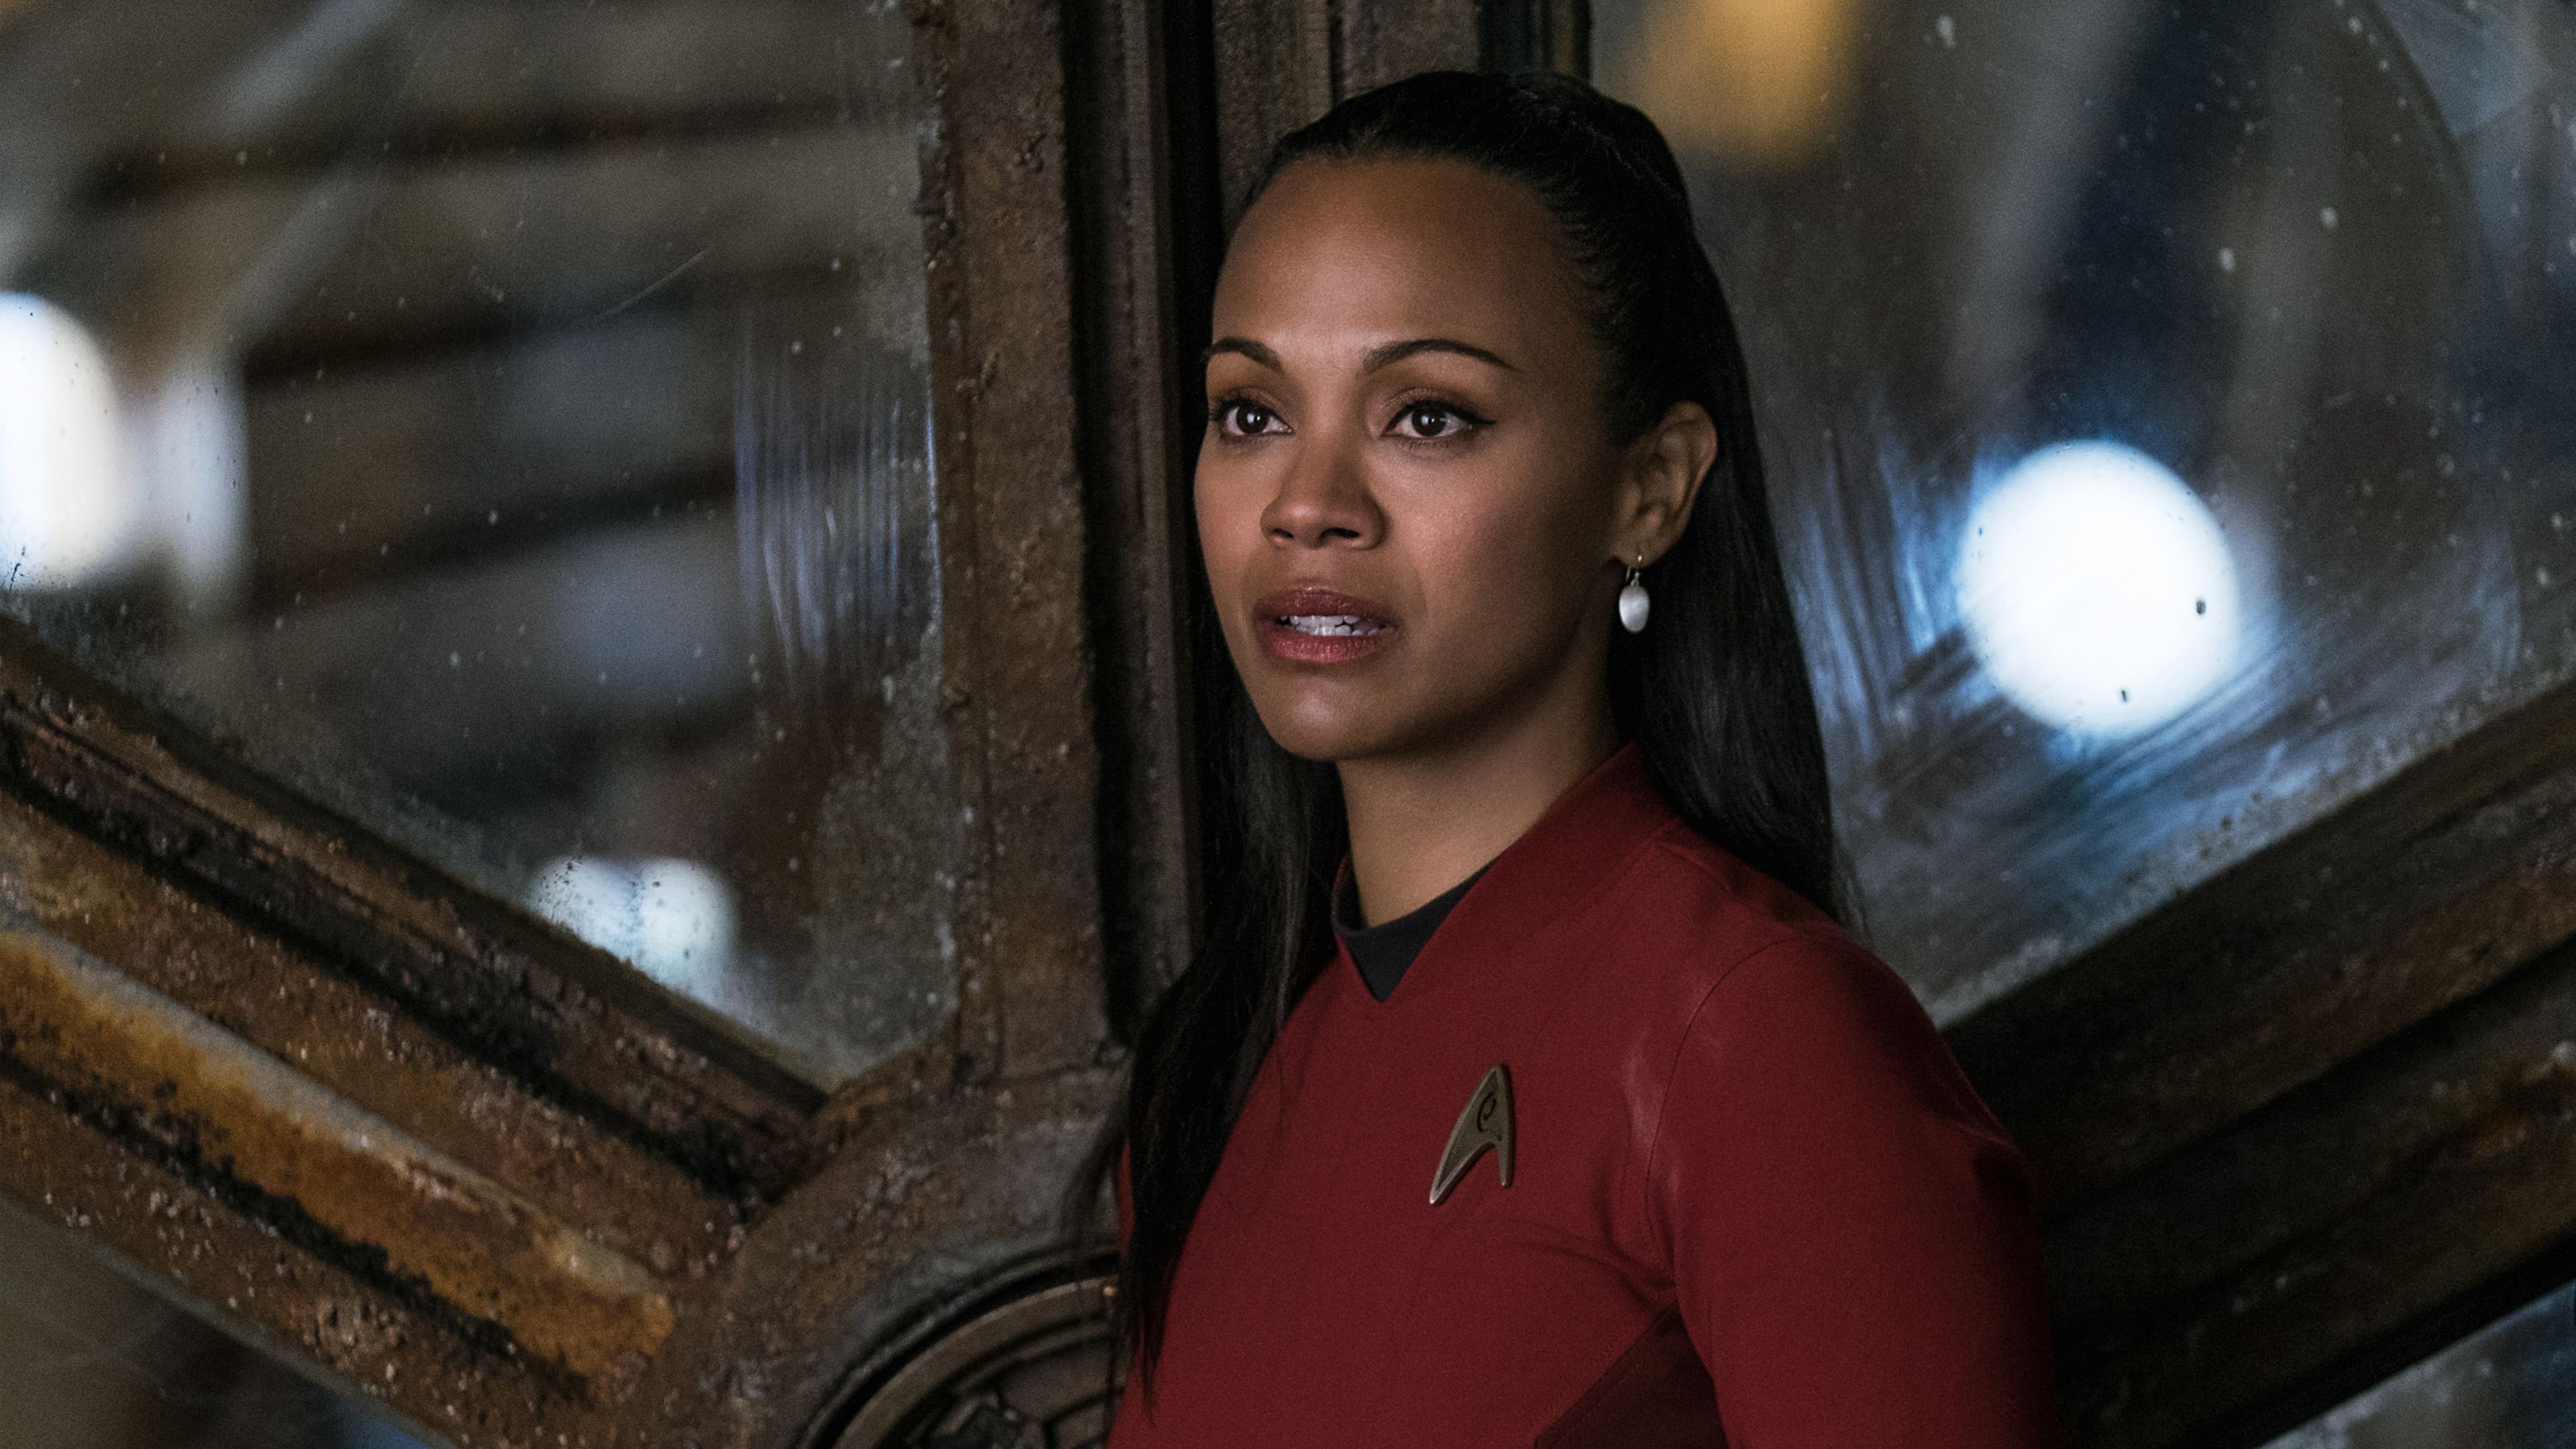 Zoe Saldana as Uhura in Star Trek Beyond. The crew of the USS Enterprise return to Earth to face a new threat, but they are forced to leave behind their old lives and embrace a new reality. - Star Trek